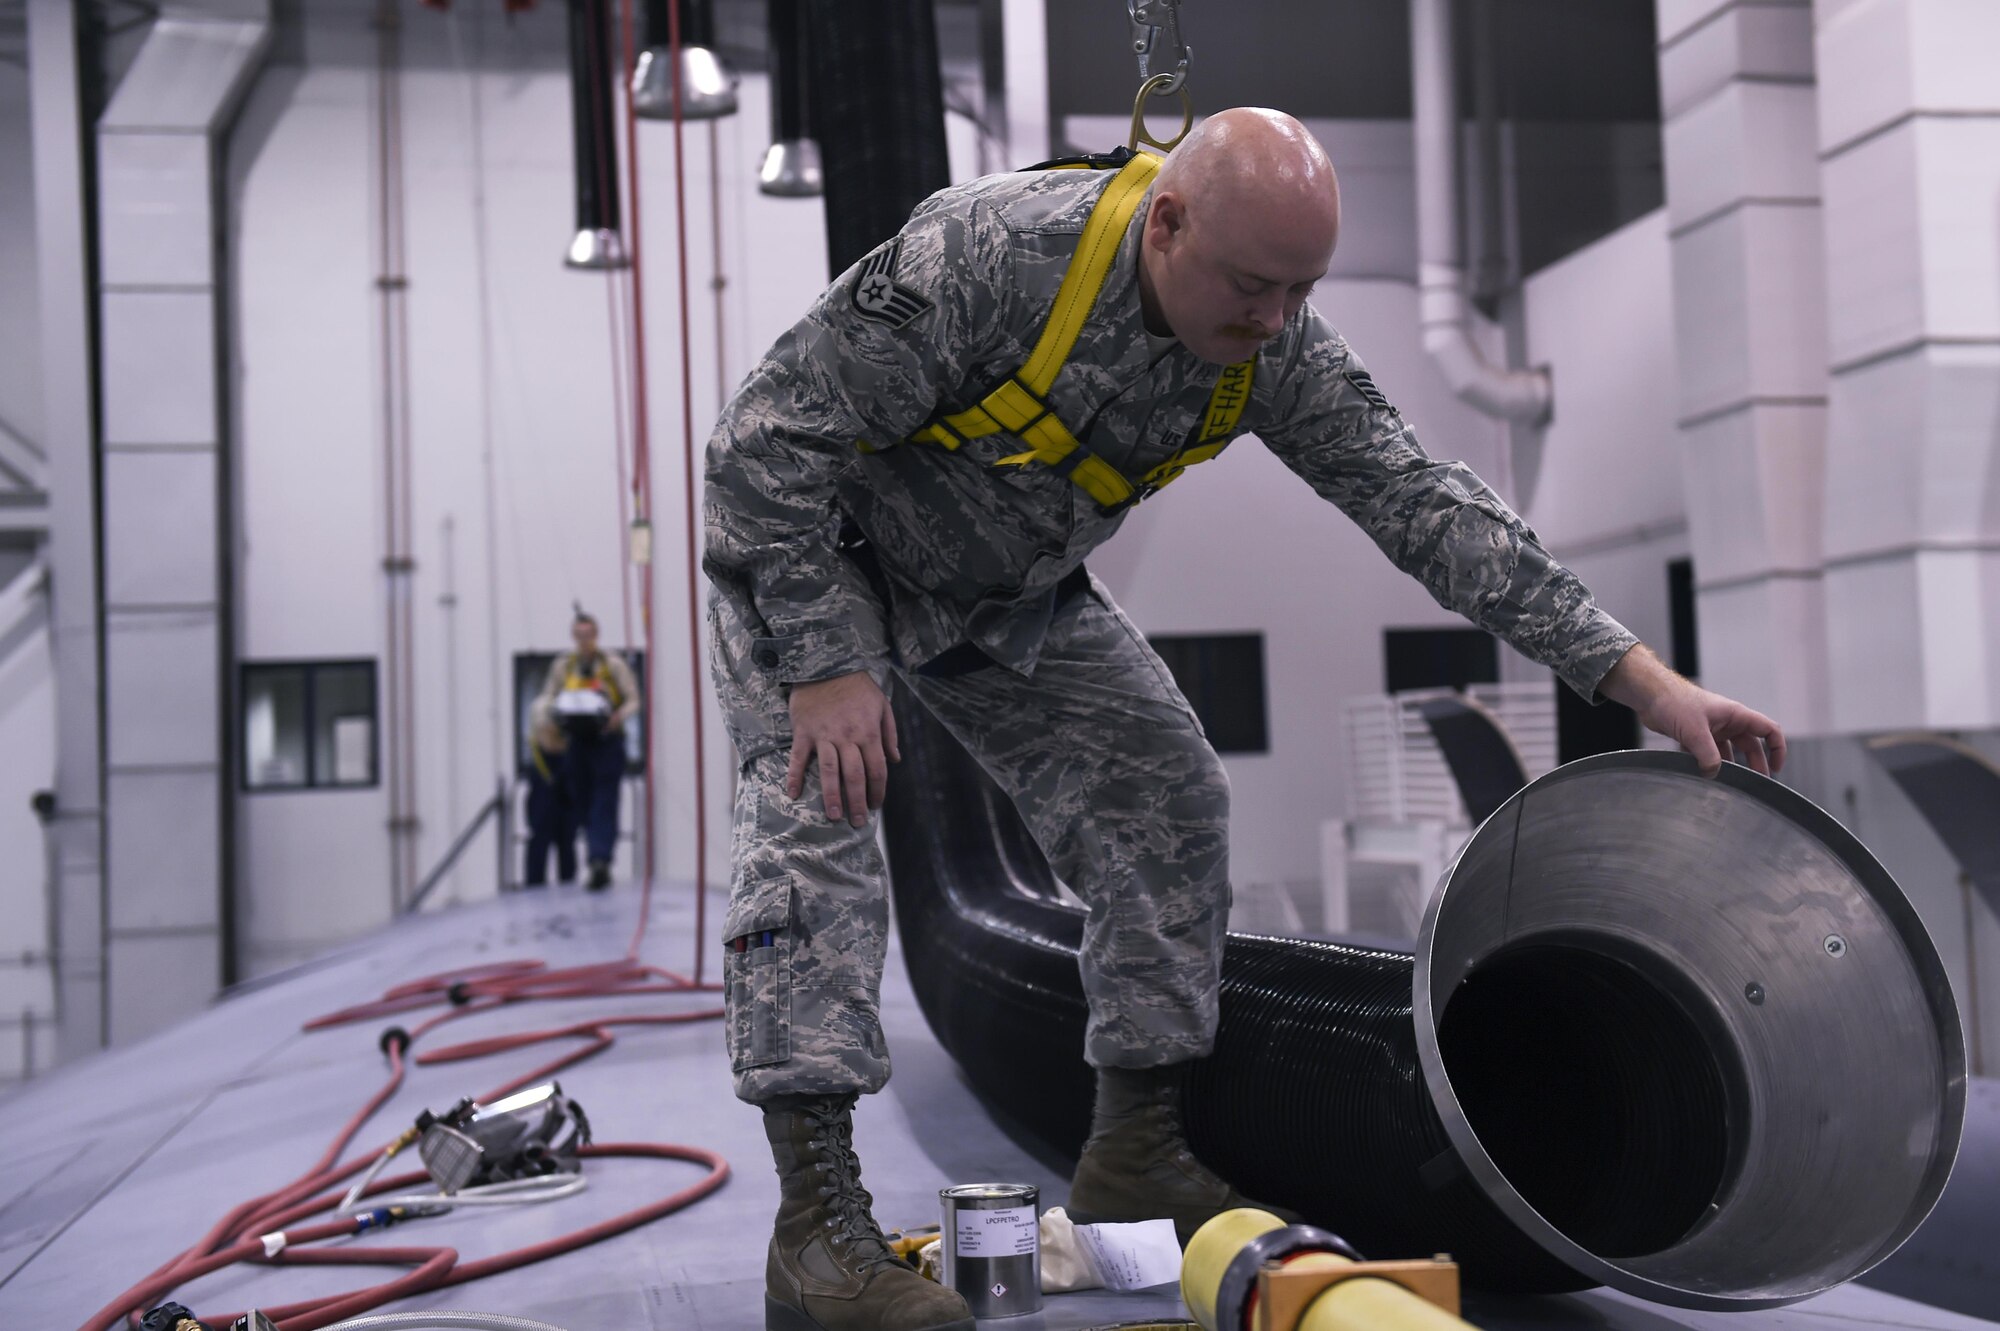 U.S. Air Force Staff Sgt. Jacobb Nordstrom, 19th Maintenance Squadron fuel systems repair craftsman, moves an air duct to assist an Airman performing repairs inside a C-130J fuel cell Dec. 5, 2016, in Hangar 232 on Little Rock Air Force Base, Ark. U.S. Air Force Airmen are required to wear specially made coveralls and respirators whenever they enter a fuel tank. (U.S. Air Force photo/Senior Airman Harry Brexel)